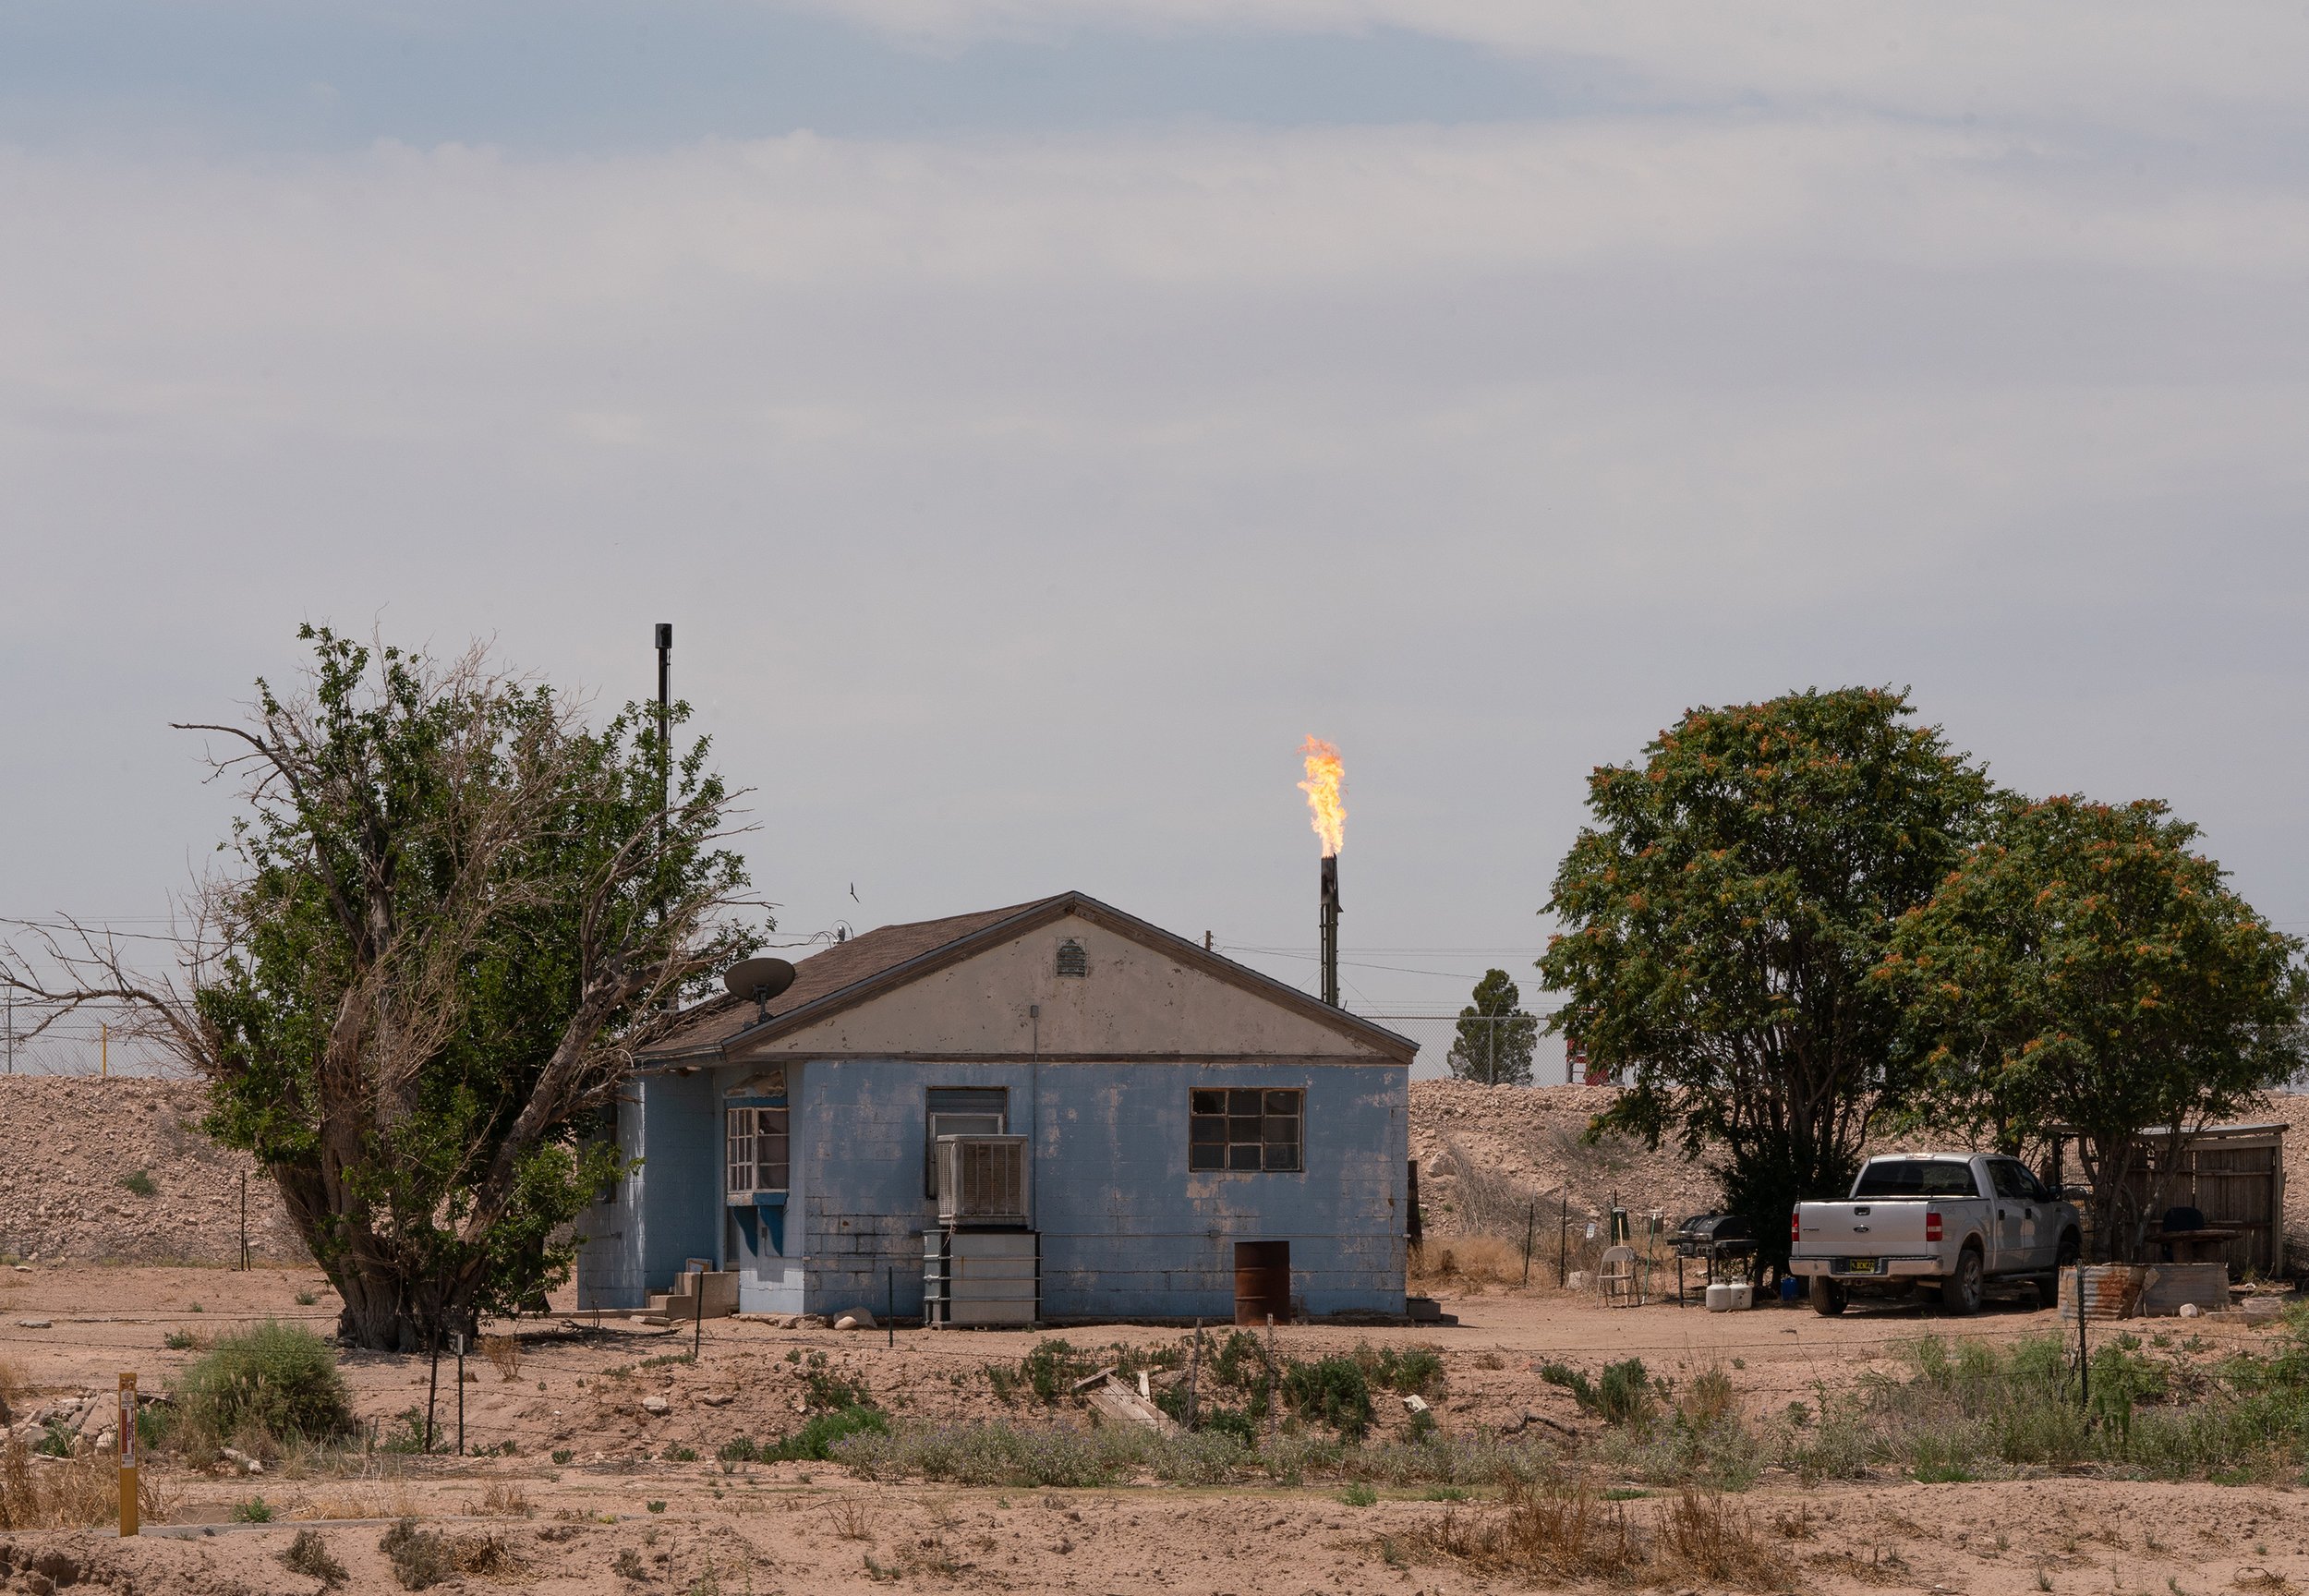 Oil and Gas Wells in the Permian Basin photographed for the Center for Biological Diversity